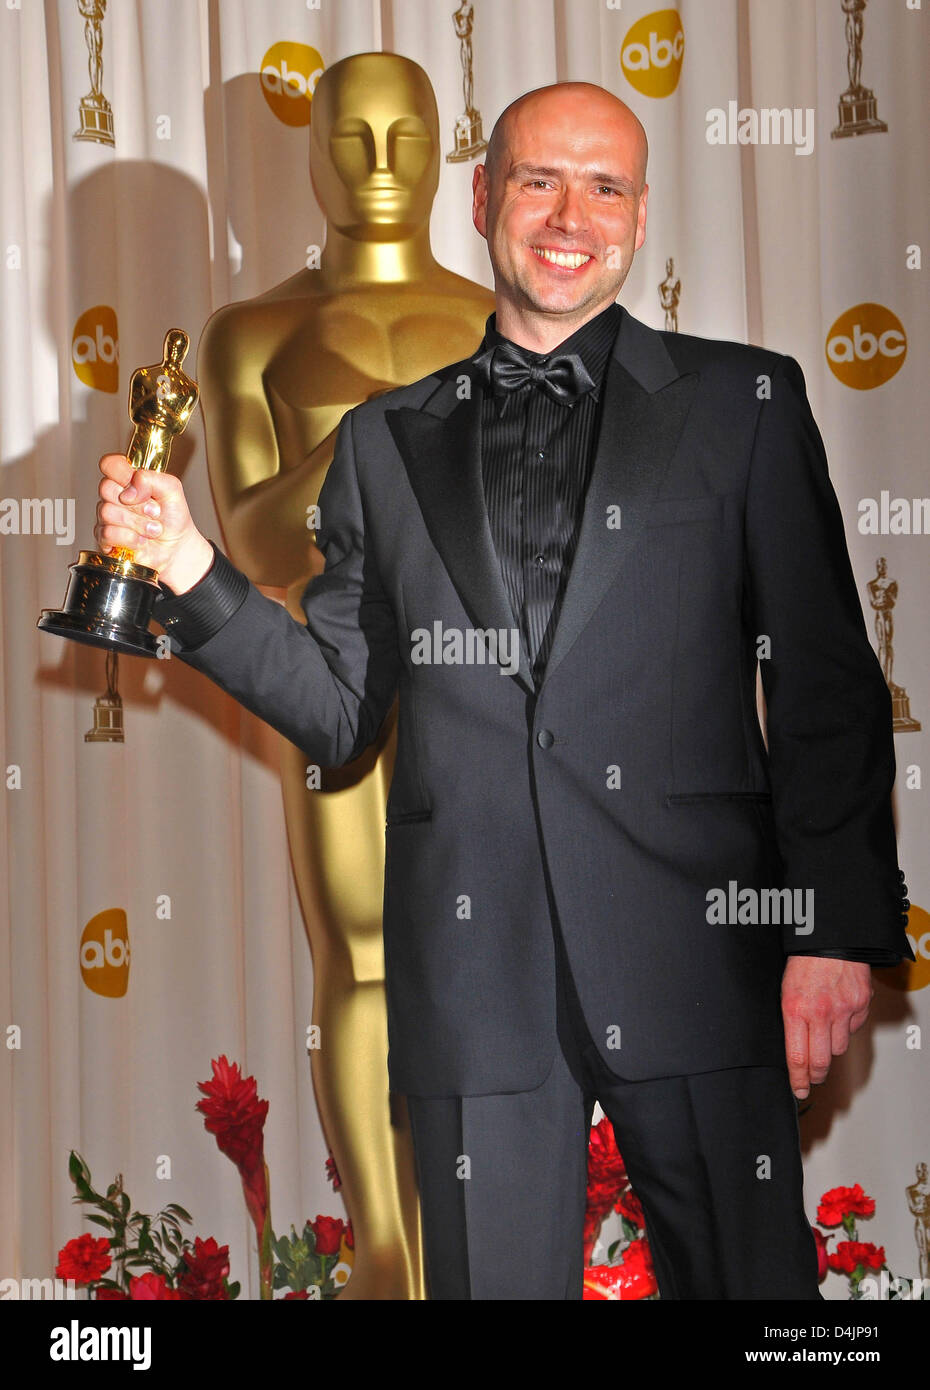 German director Jochen Alexander Freydank accepting the Oscar for Short Film (Live Action) for ?Spielzeugland (?Toyland?) poses in the press room during the 81st Annual Academy Awards at the Kodak Theatre in Hollywood, Los Angeles, California, USA, 22 February 2009. Photo: Hubert Boesl Stock Photo